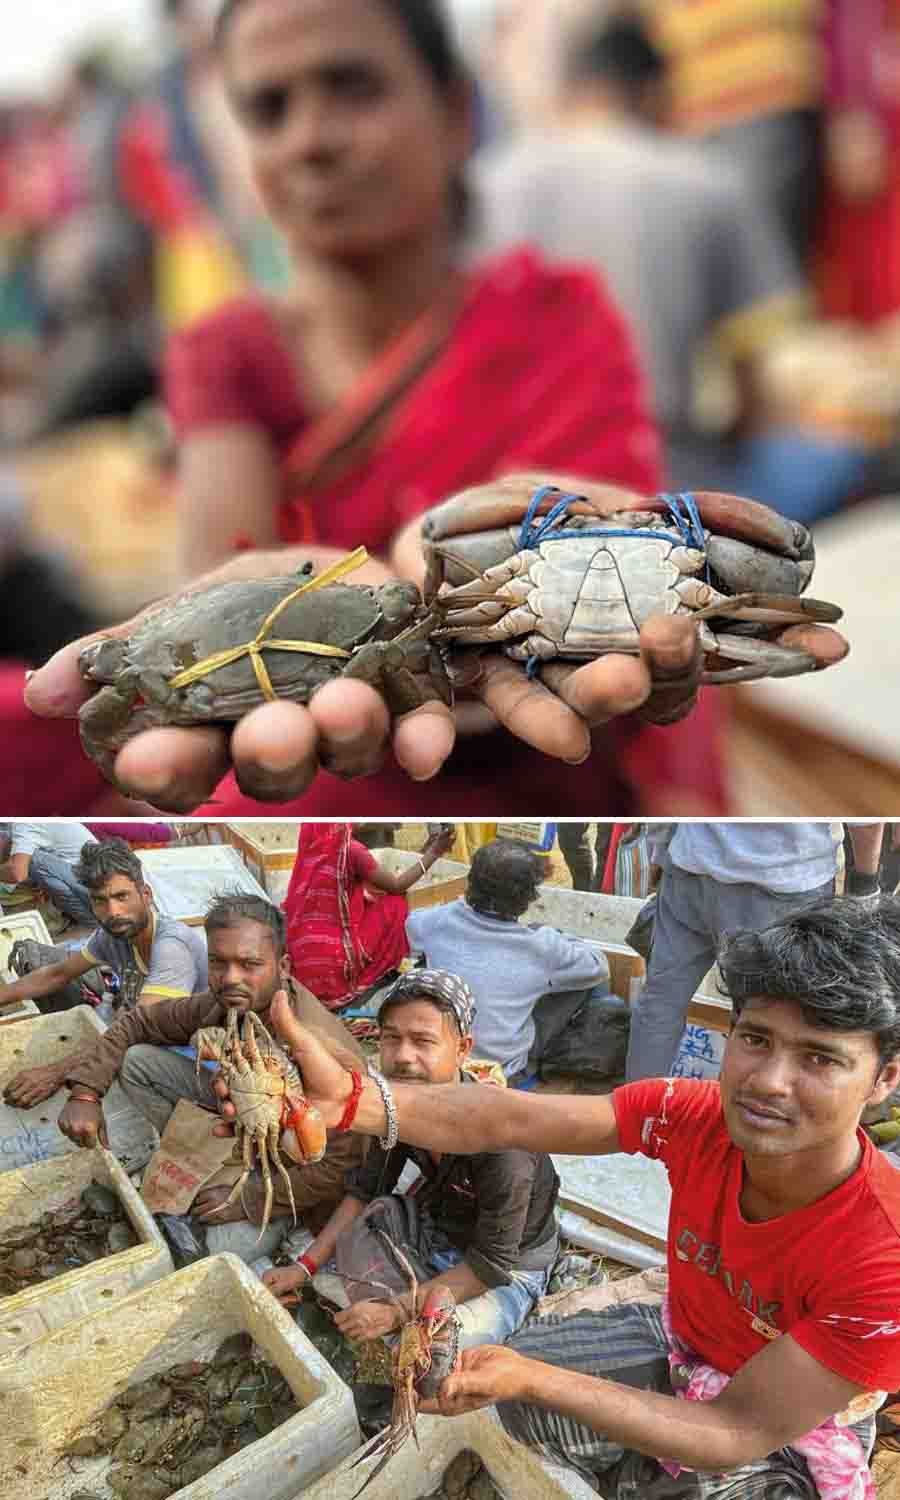 From tiny leopard crabs to giant jumbo crabs, the crab-sellers hawk their fare from early morning till sundown. The smaller crabs are sold for Rs 300-400 per kg, the medium-sized for Rs 600-1,000 per kg and the jumbo ones for up to Rs 2,000 per kilo